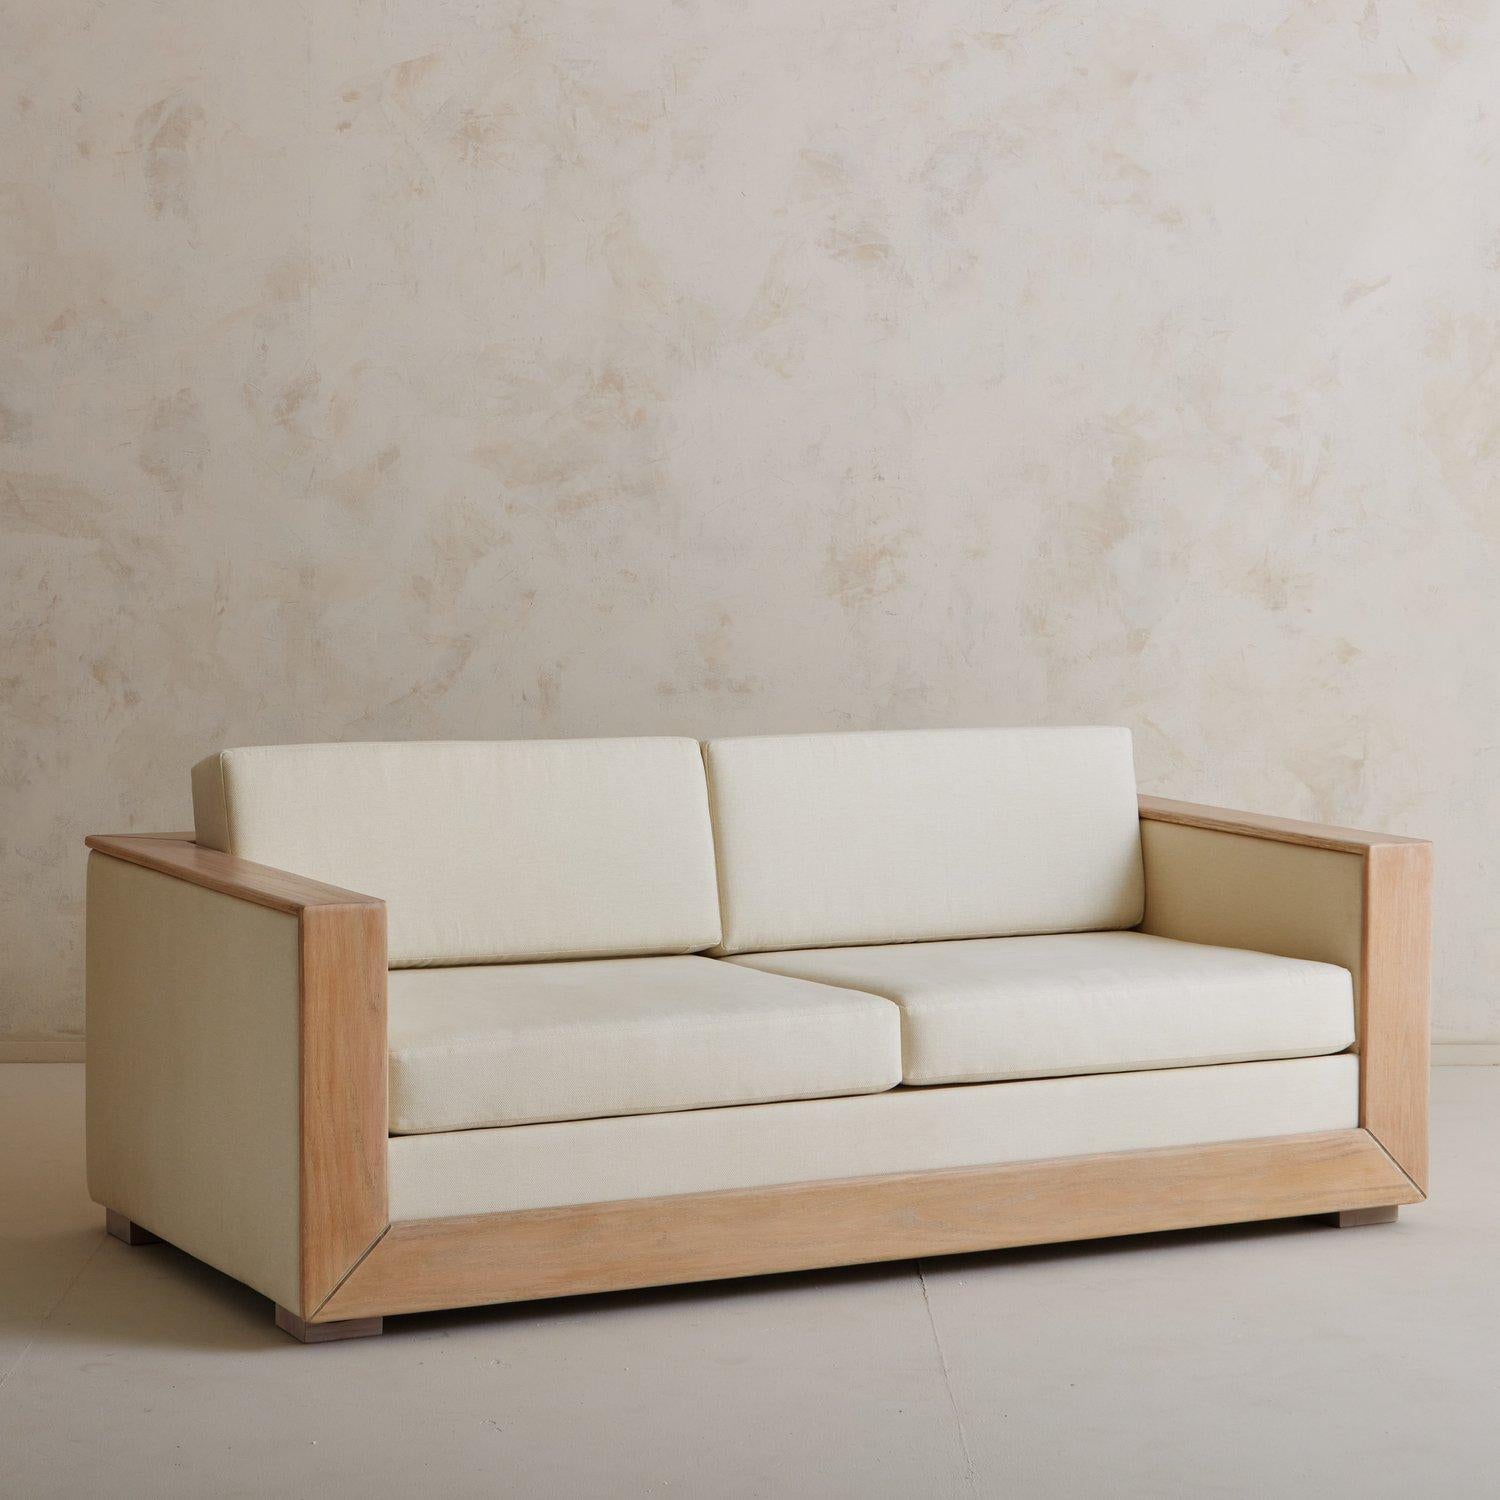 An Art Deco style sofa newly reupholstered in a textured cream fabric. This sofa has a cerused oak trim and stands on four wooden block feet. We love the angular lines and elegant profile on this classic piece. Sourced in France, 20th Century. 2